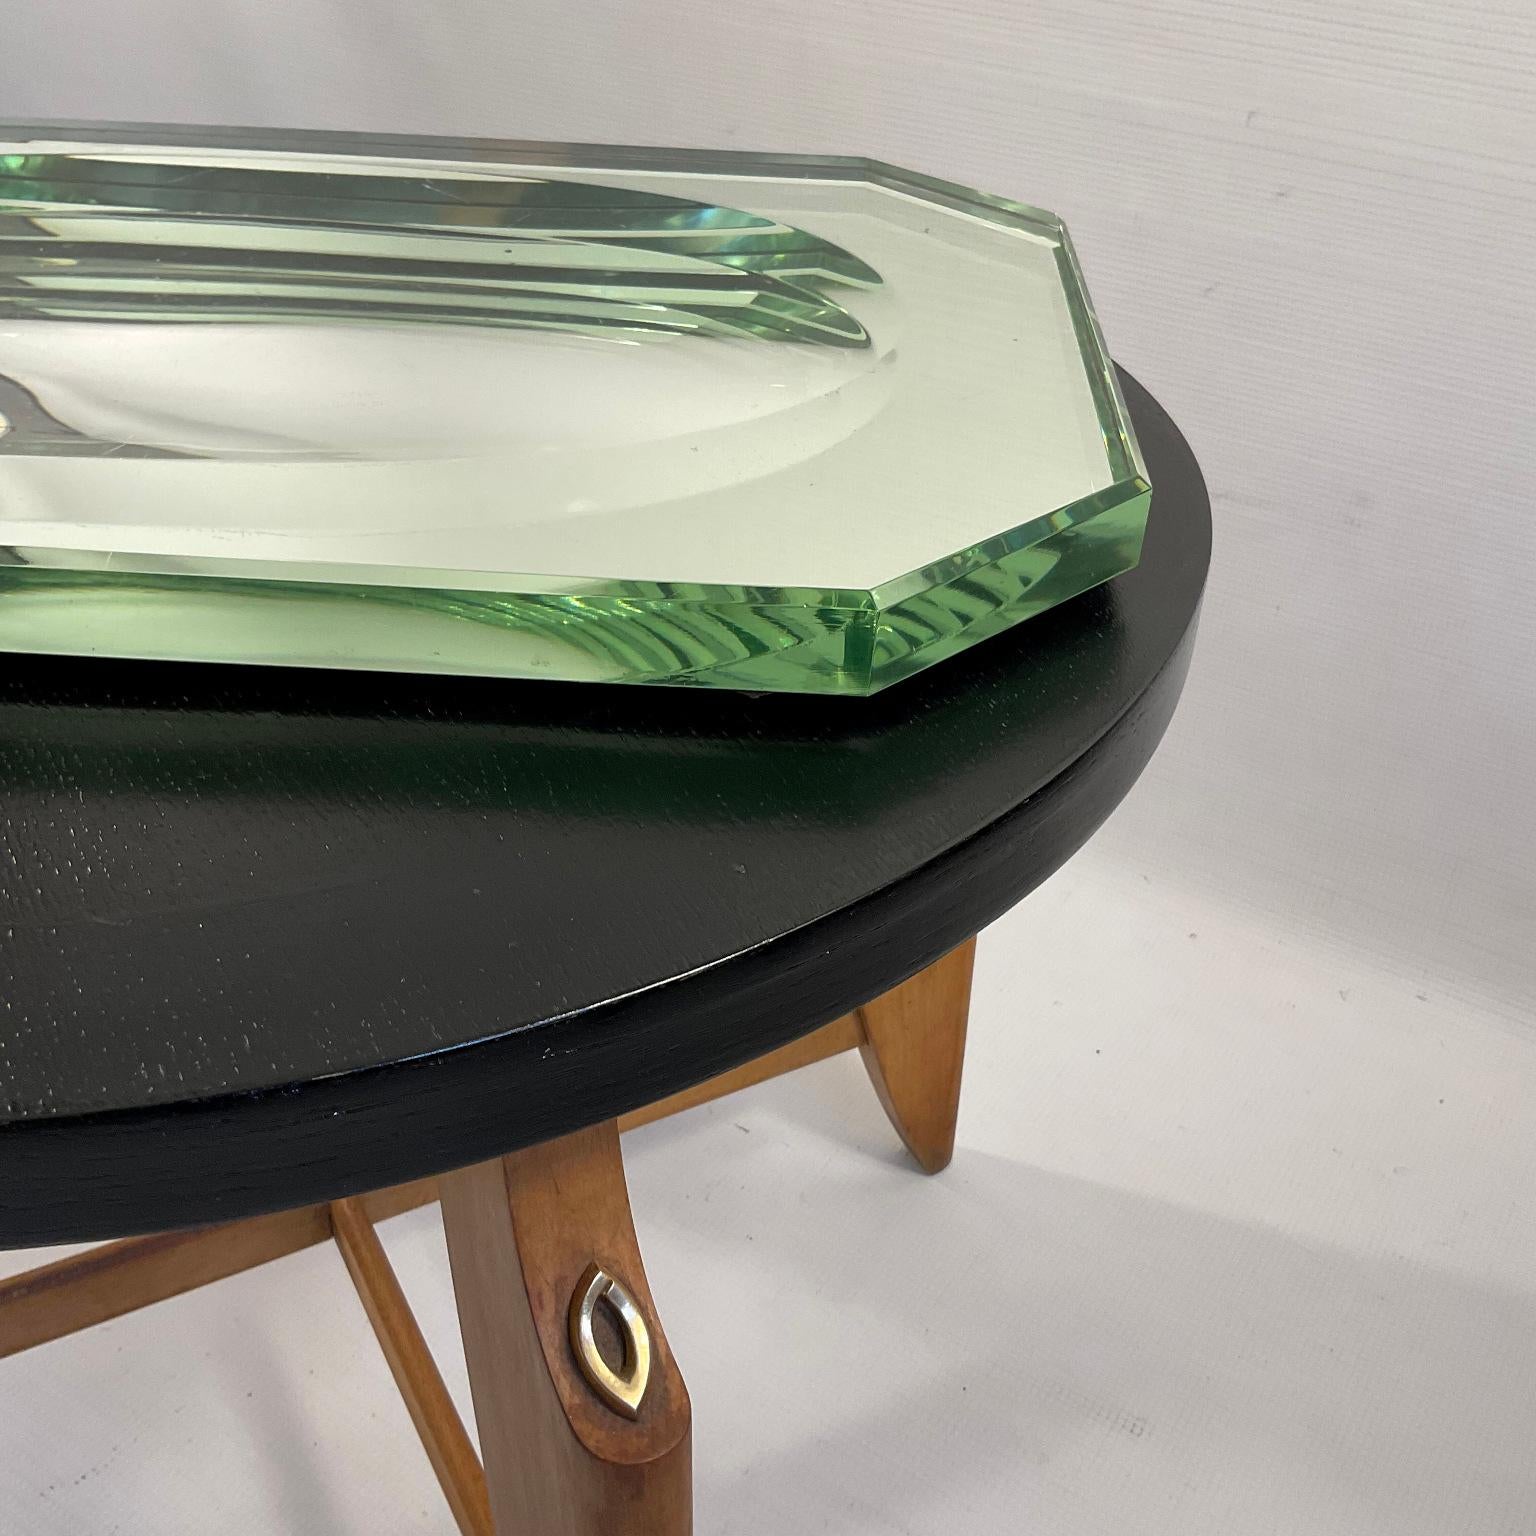 Art Glass 1930s Art Deco Glass Centerpiece Attributed to Jean Luce For Sale